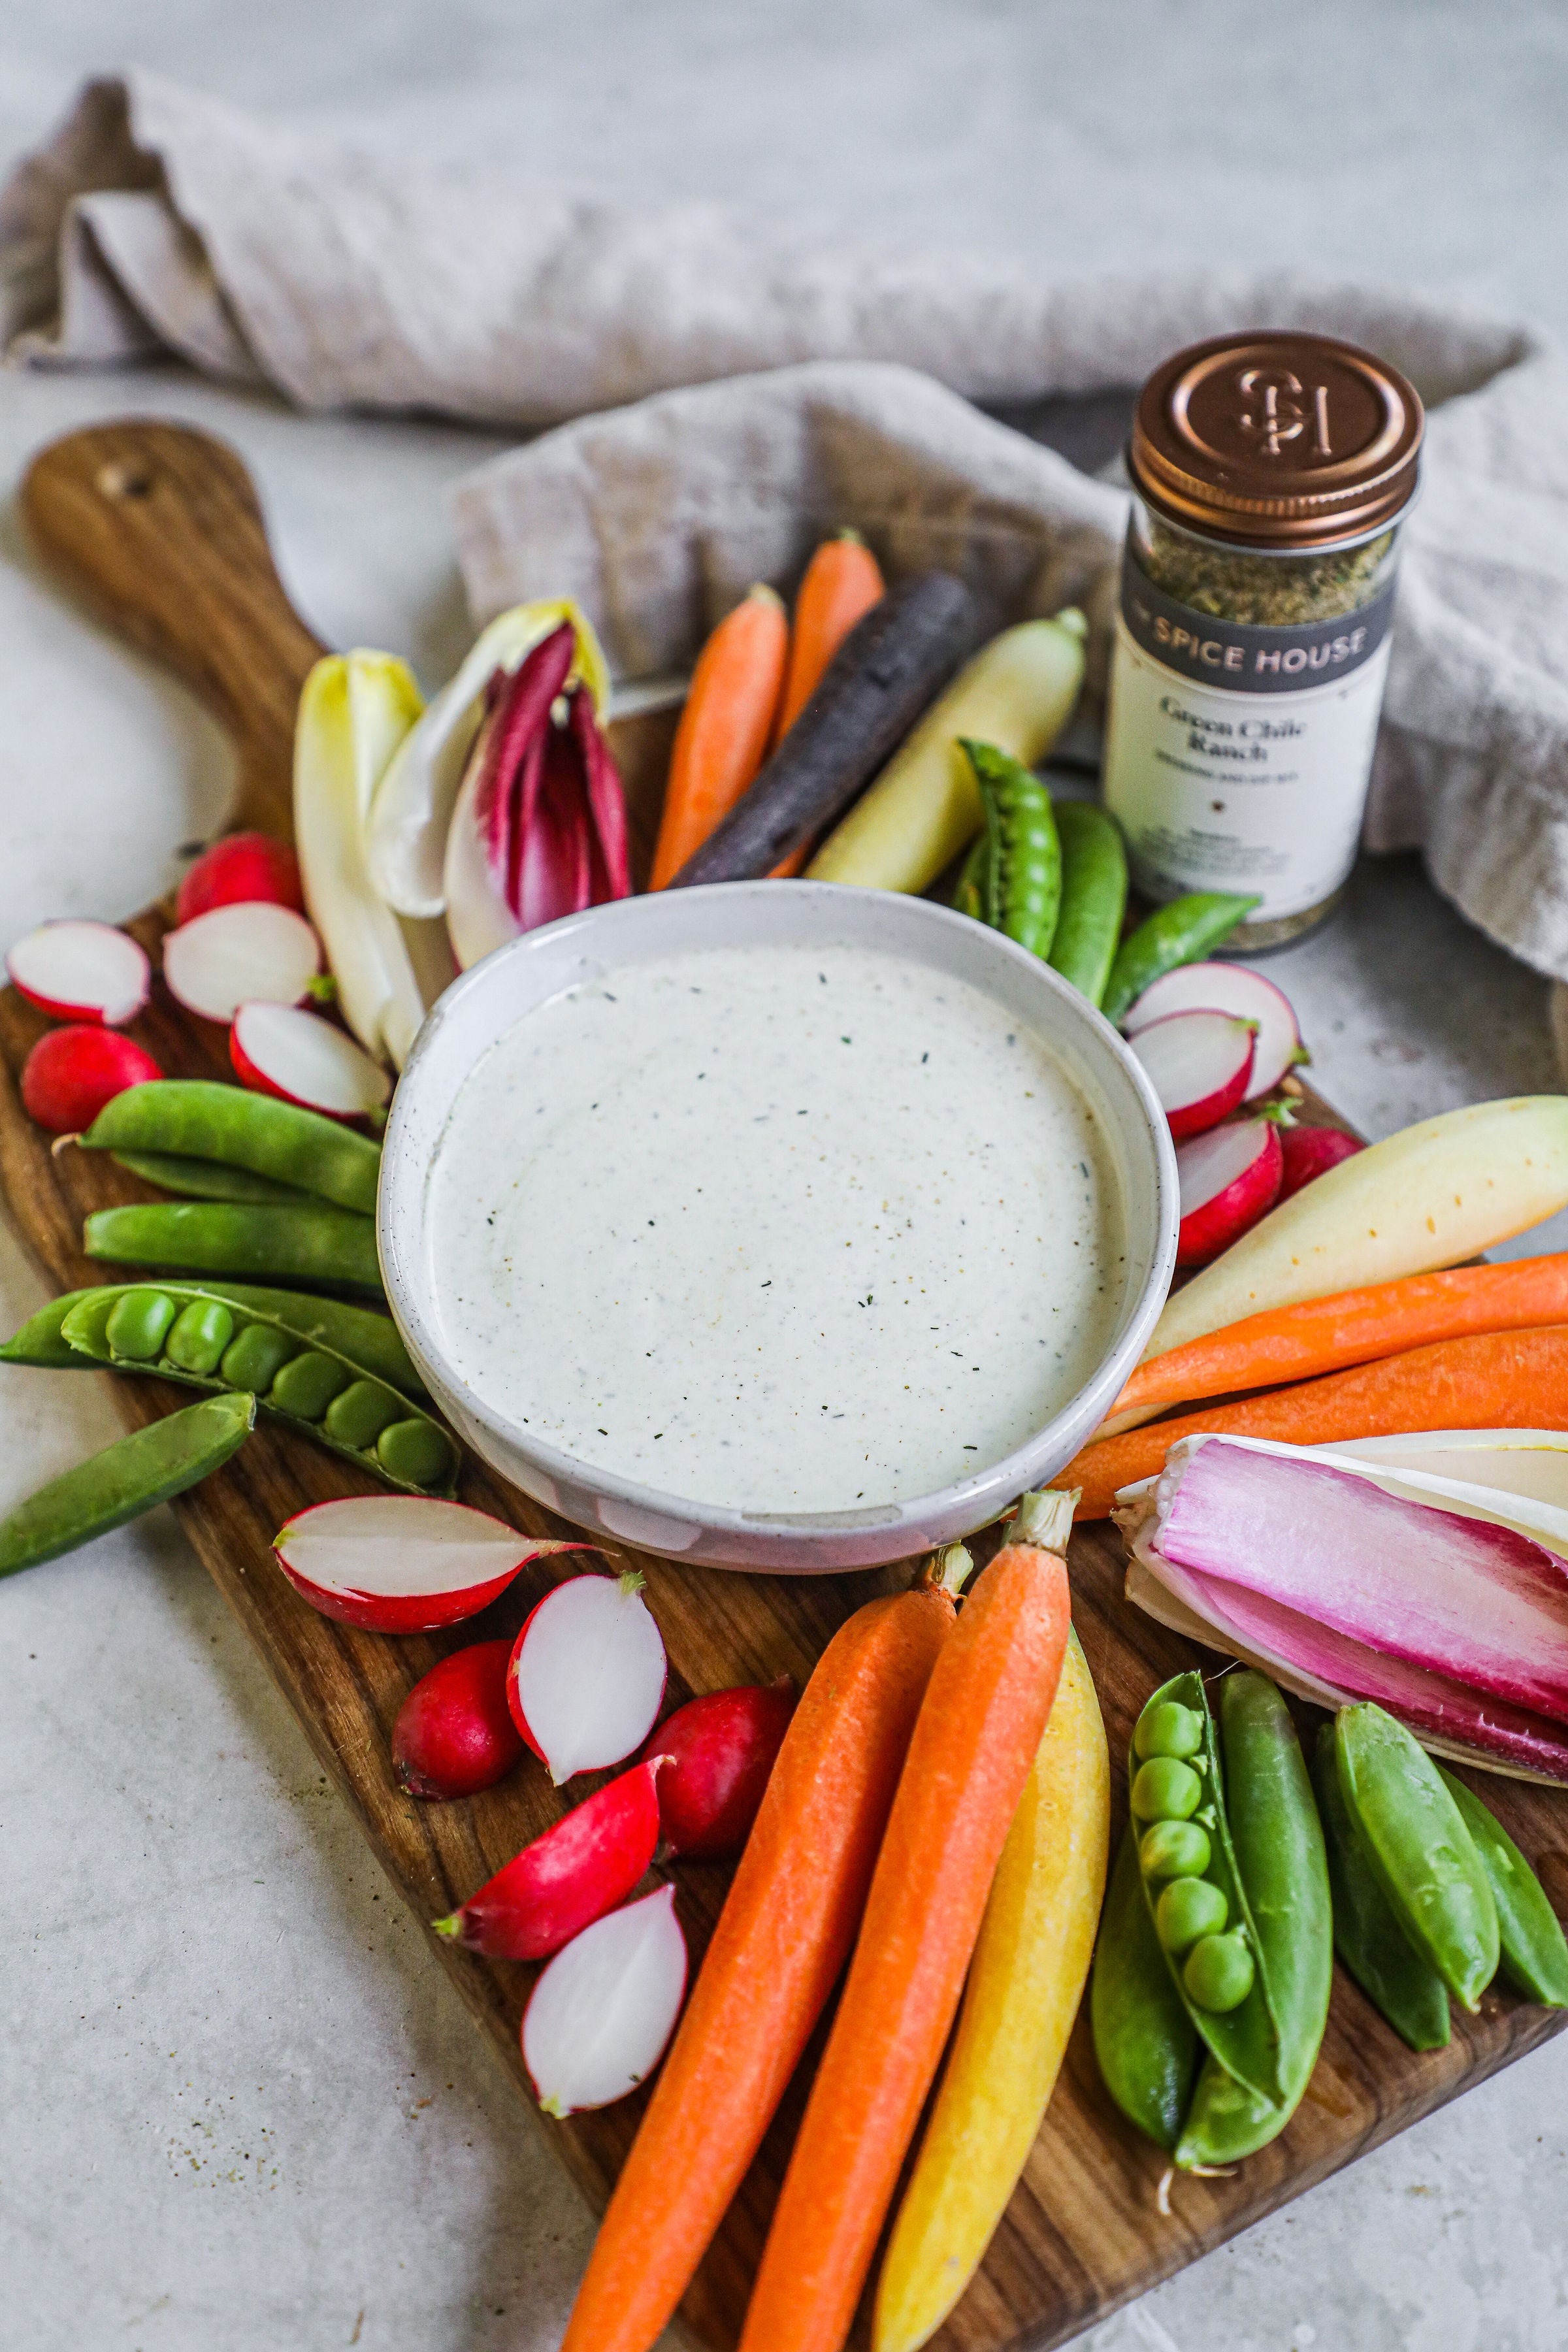 Green Chile Ranch Dressing - The Spice House